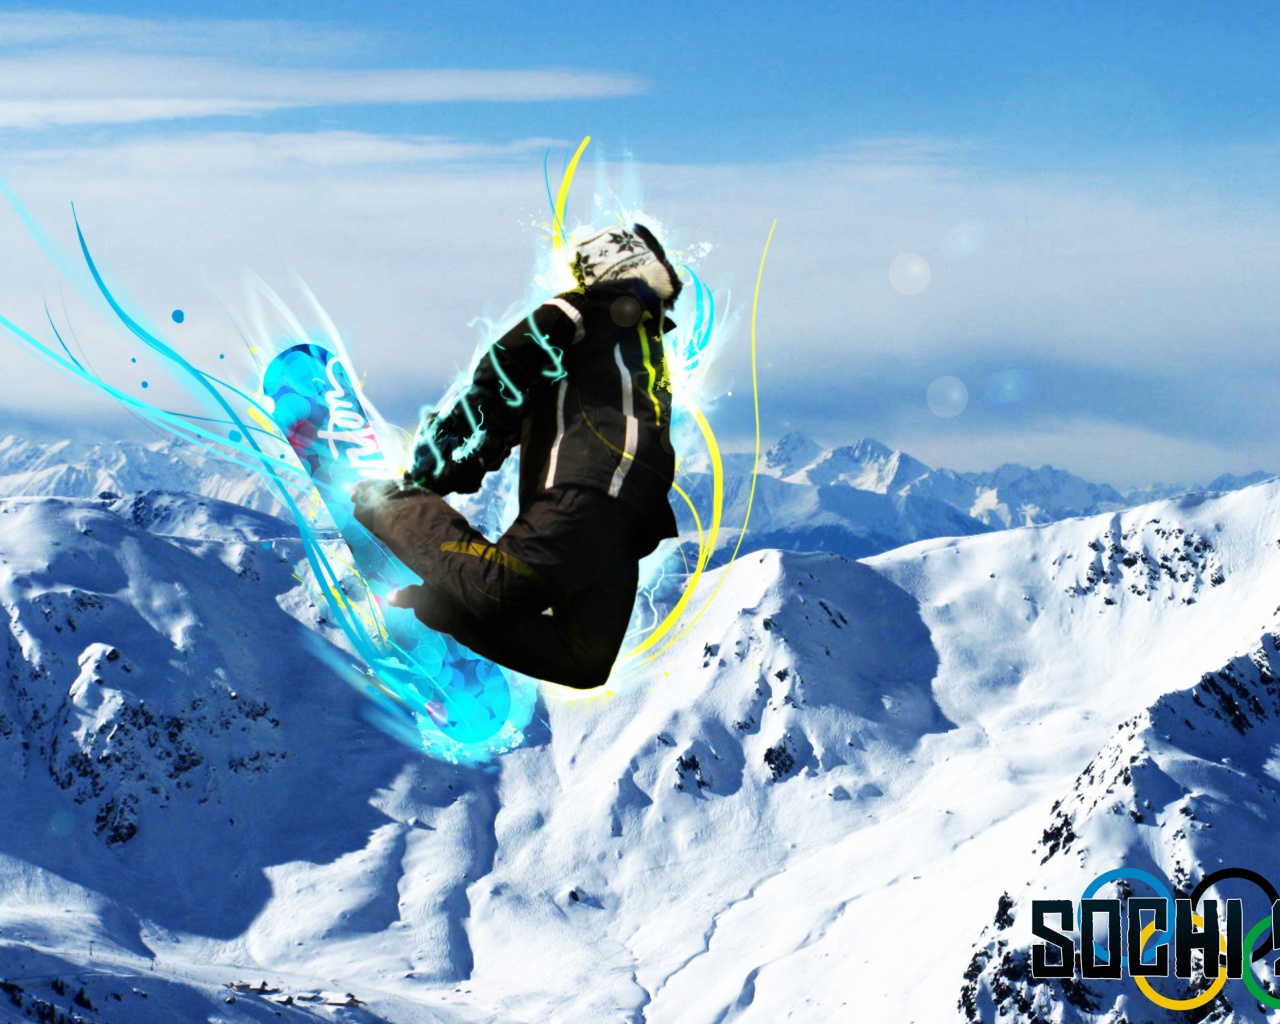 Snowboard And Mountains Sochi 2014